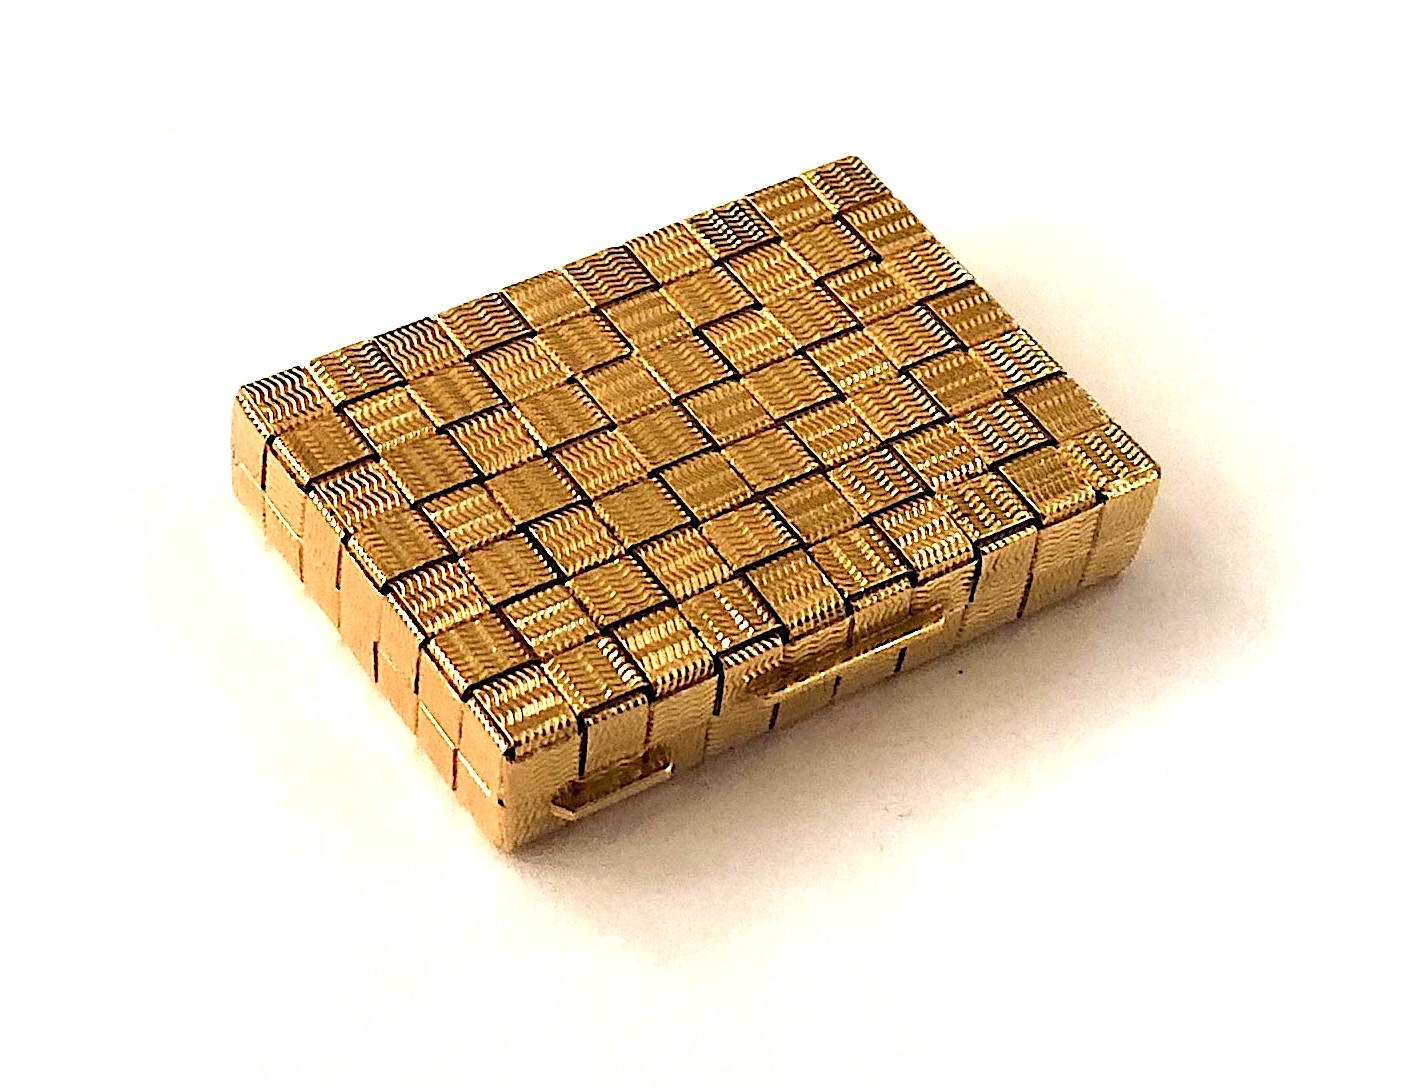 Uno A Erre, Arezzo, Italy, basket weave textured 18k gold in the form of a pill box, marked: 1AR (in a hexagon), Uno A.R. (in an oval), 750 (in a hexagon), c. 1970’s